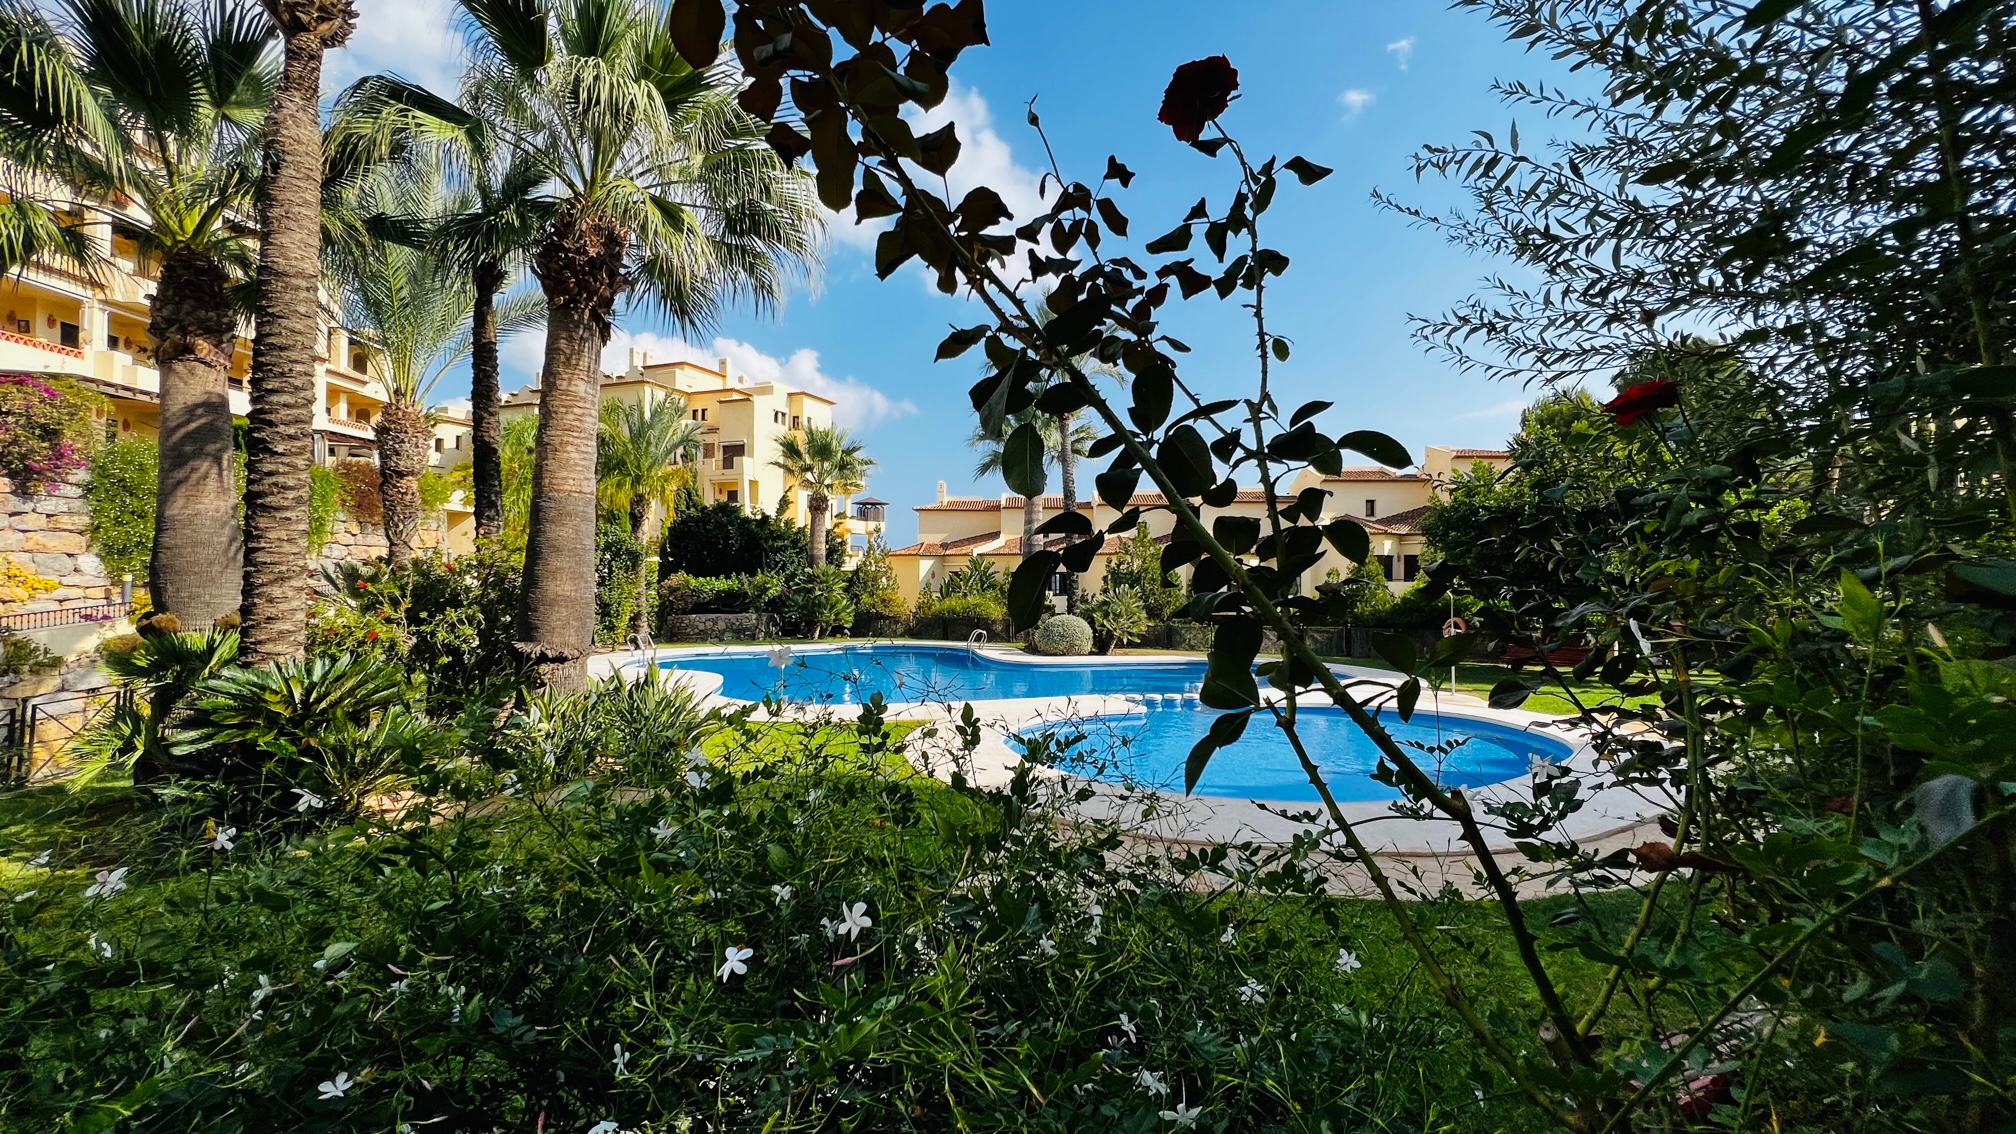 Apartment with 2 bedrooms and 2 bathrooms on the ground floor with gaden in a luxury complex - Villa Gadea. Parkings space included in the price of sale.